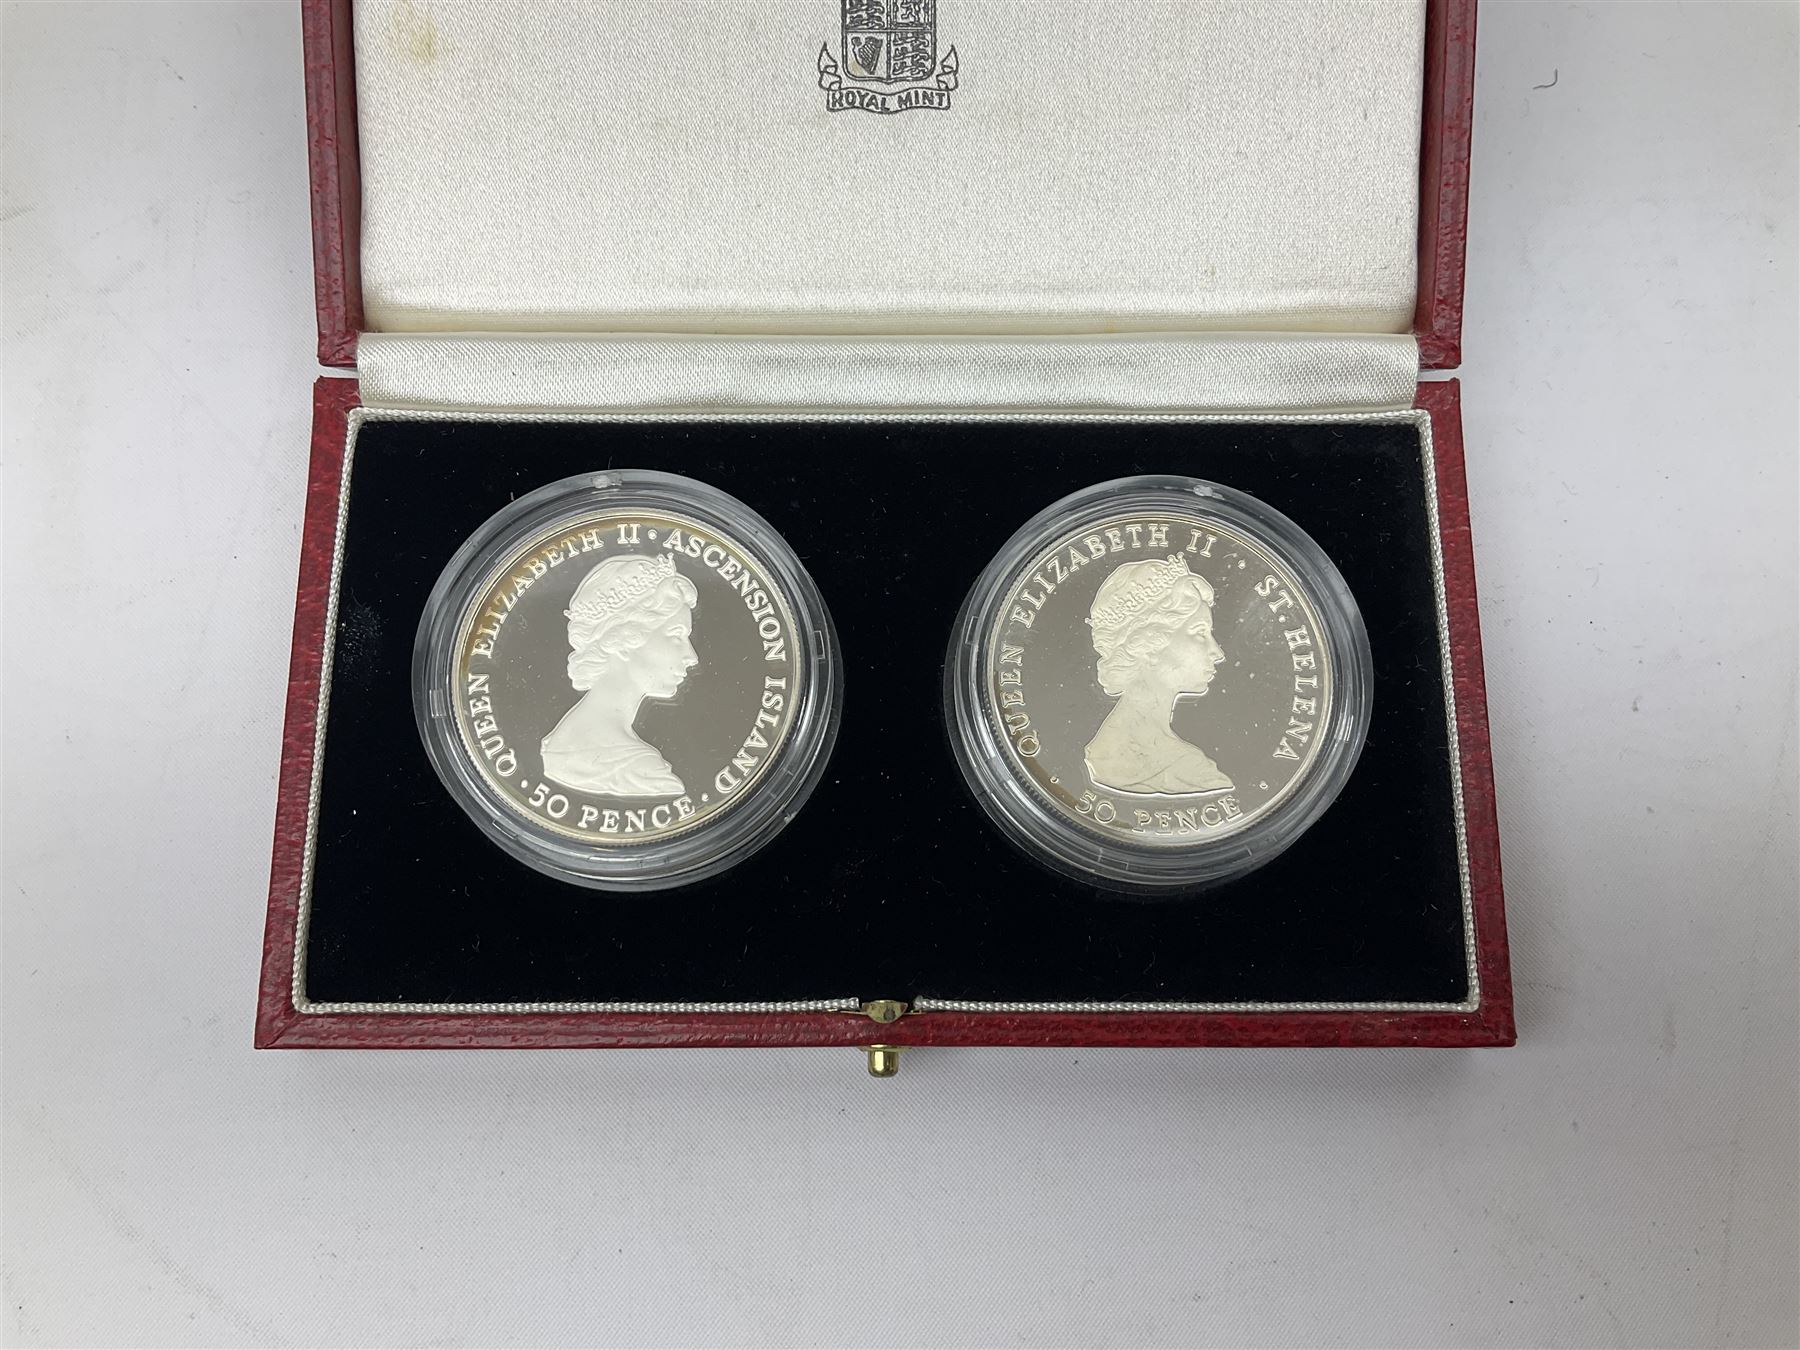 Queen Elizabeth II St. Helena and Ascension Island 1984 silver proof piedfort fifty pence two coin s - Image 3 of 6